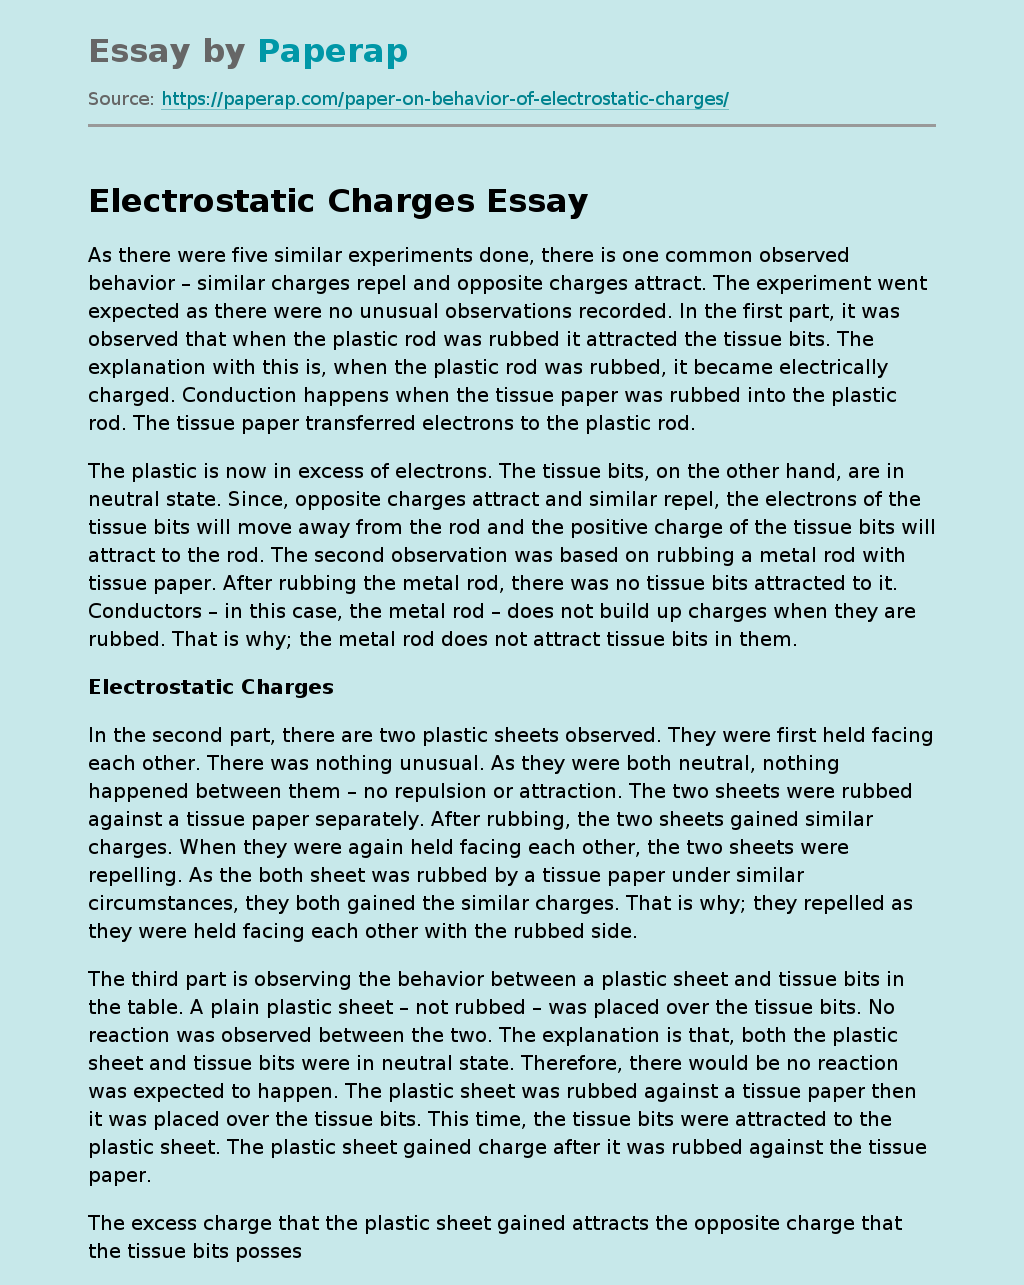 Electrostatic Charges